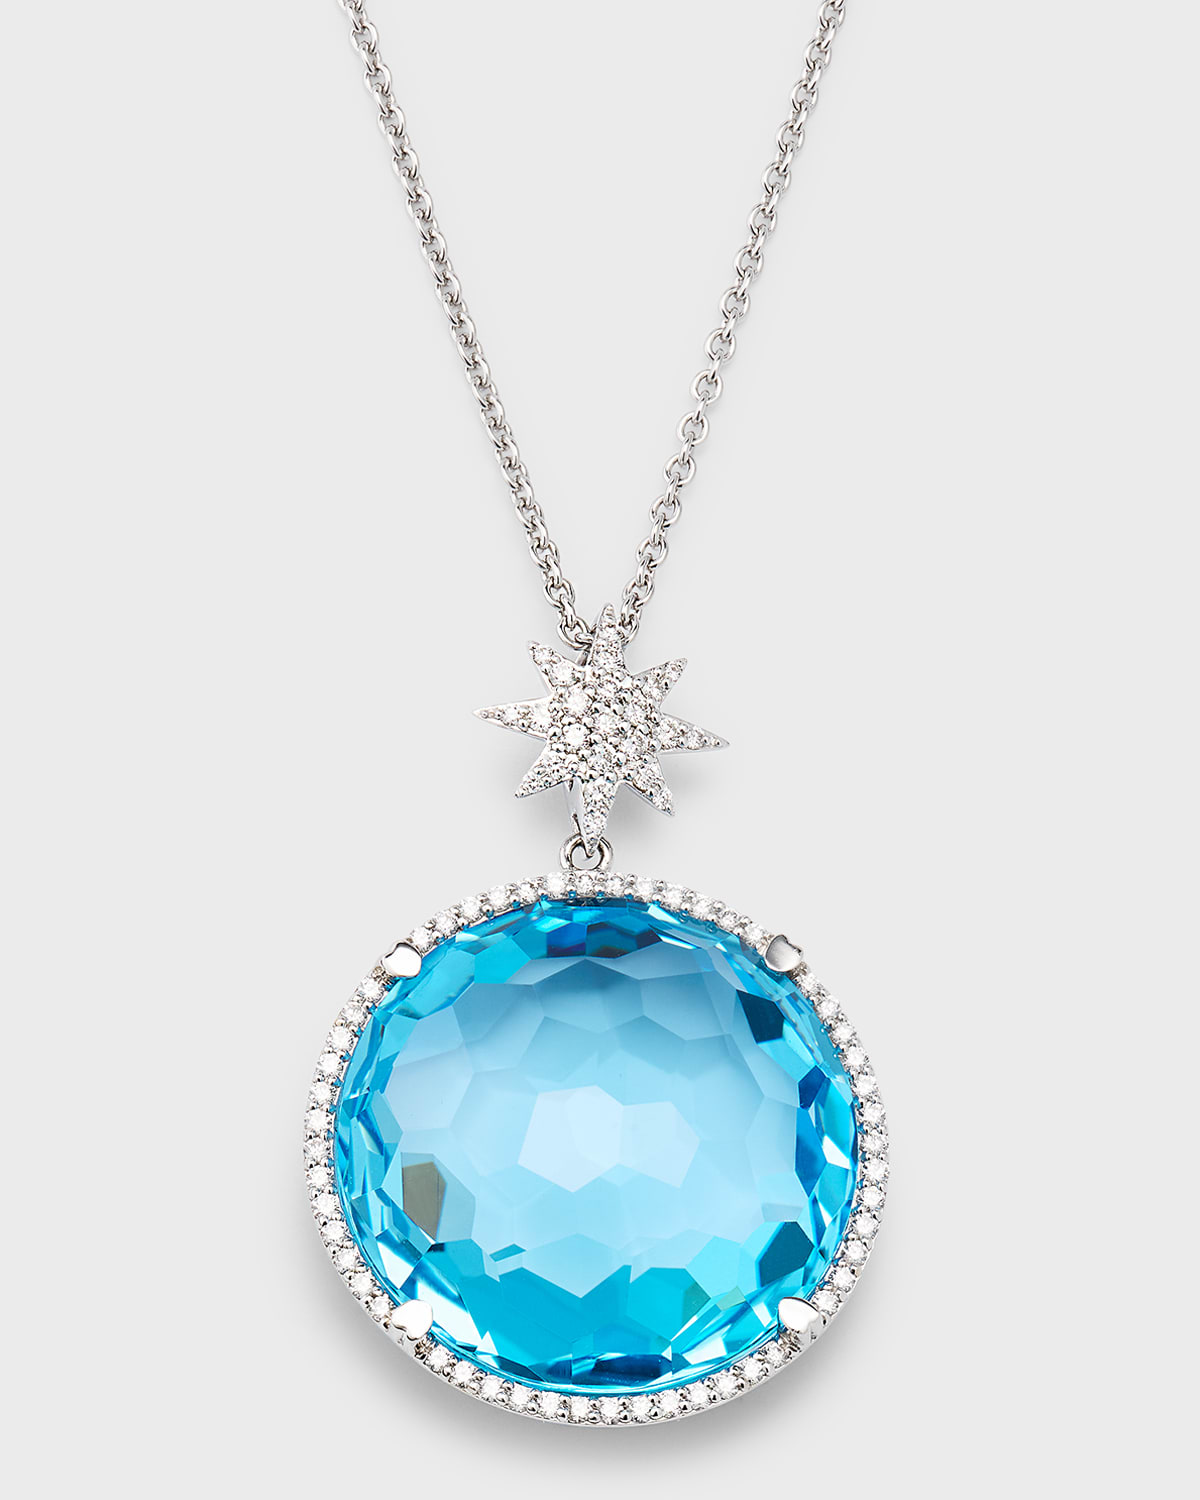 18K White Gold Round Blue Topaz and Diamond Necklace with Star Bail